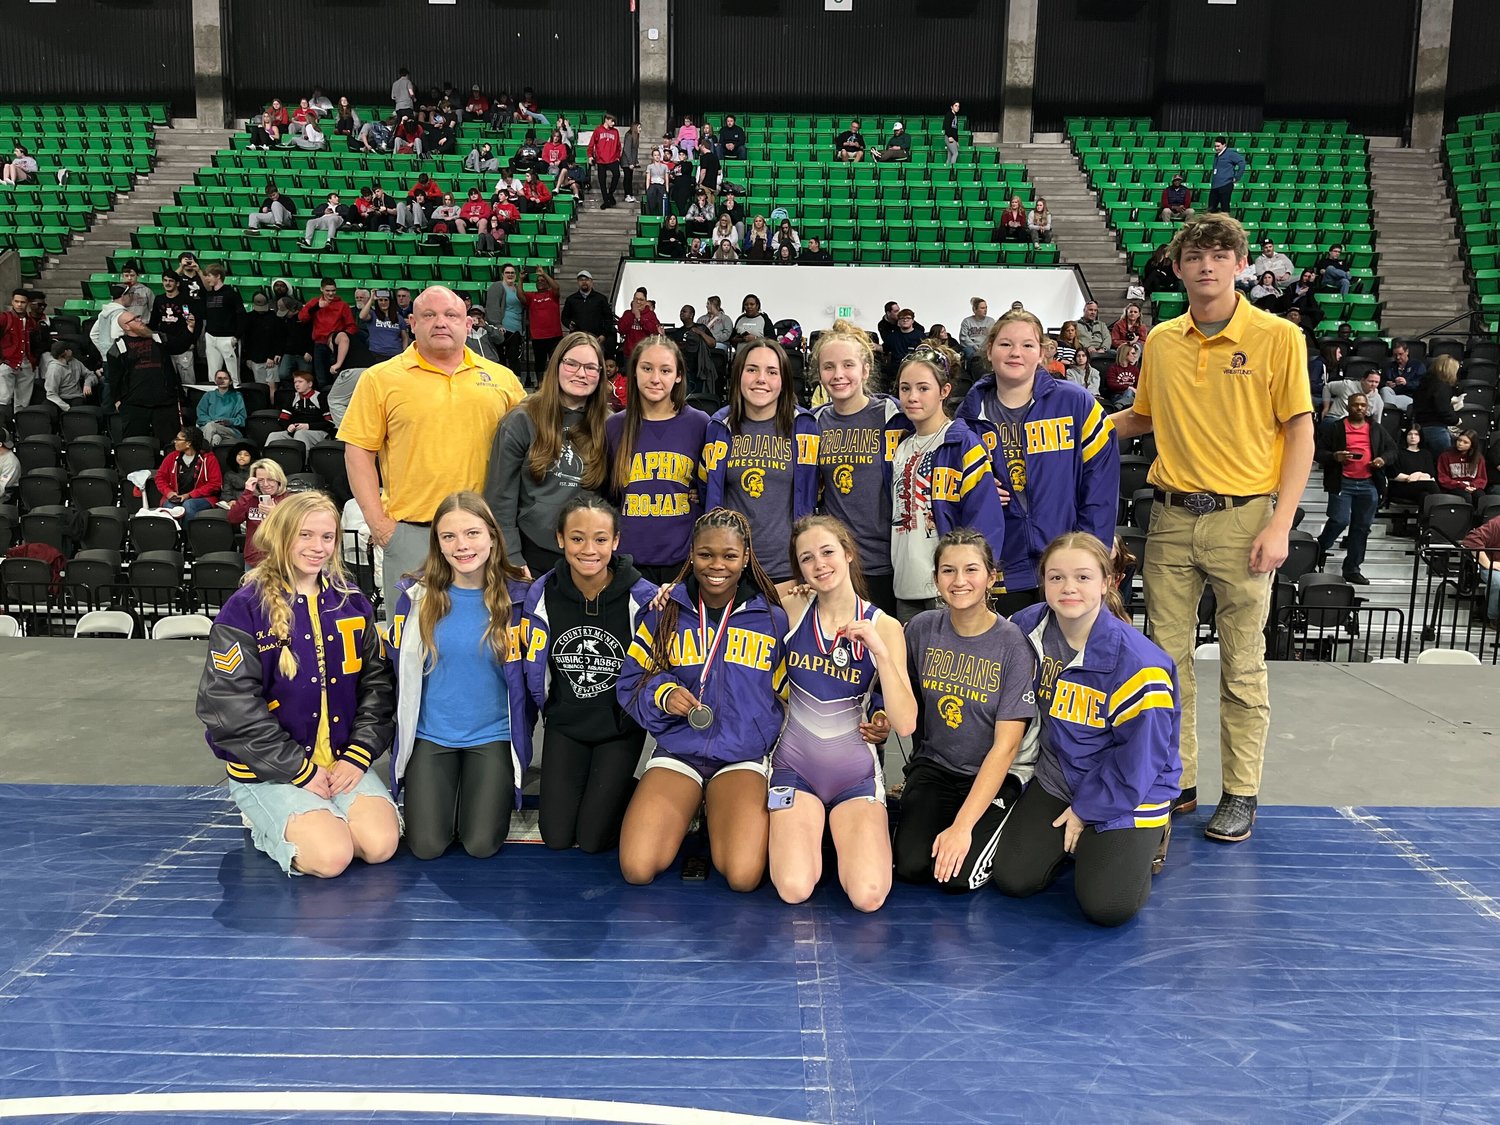 The Daphne Lady Trojans finished as state runners-up at the girls’ wrestling state finals at Bill Harris Arena in Birmingham Friday, Jan. 20.